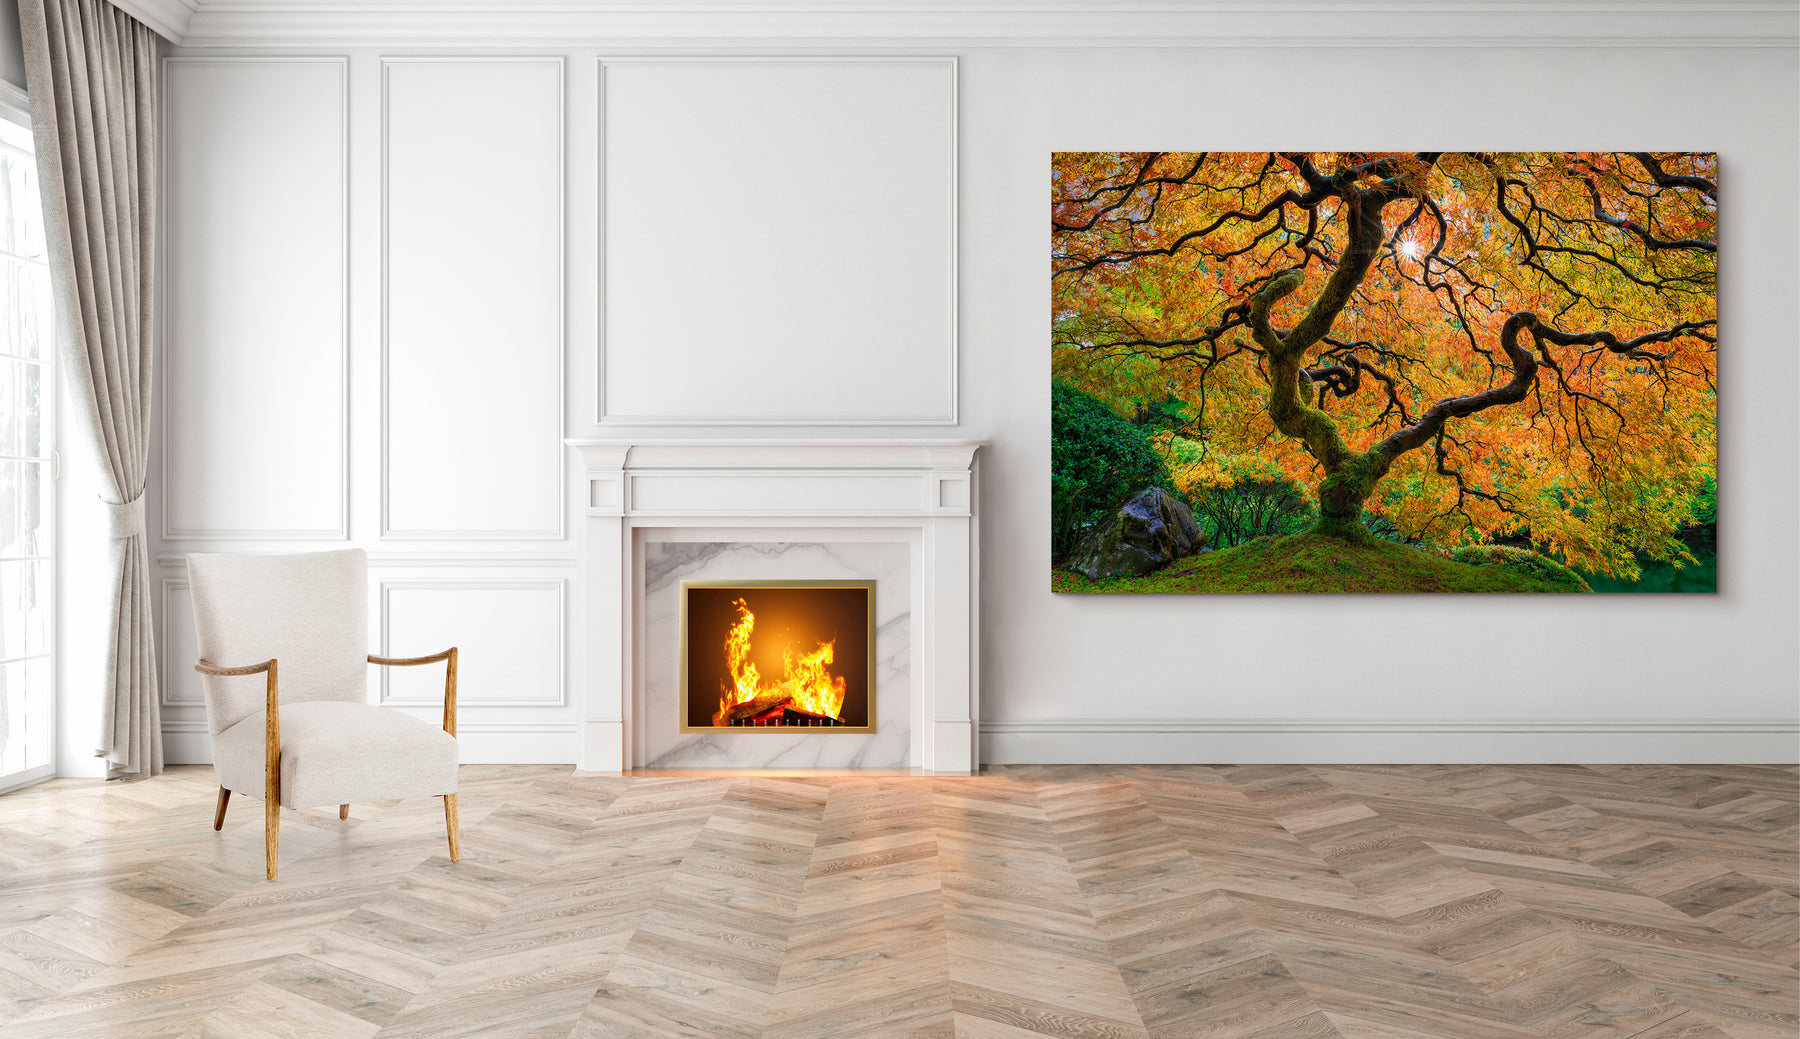 Photo of Japanese Maple with yellow and orange leaves photographed by Peter Lik handing on the wall of a living room with hardwood floors